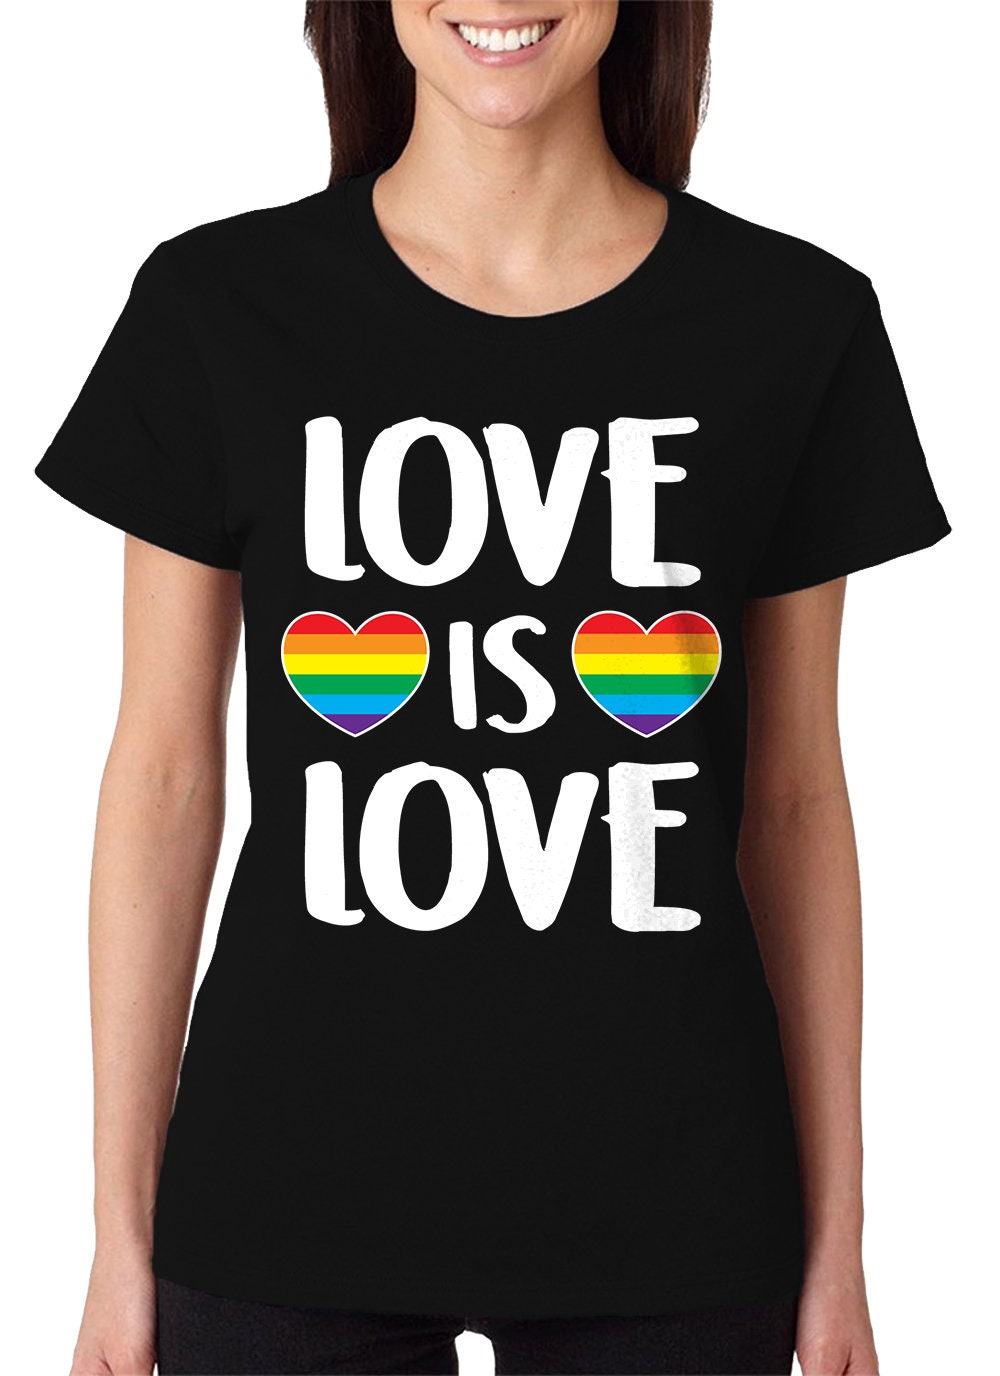 Love is Love Happiness Good Vibes Gay LGBT Pride Community | Etsy